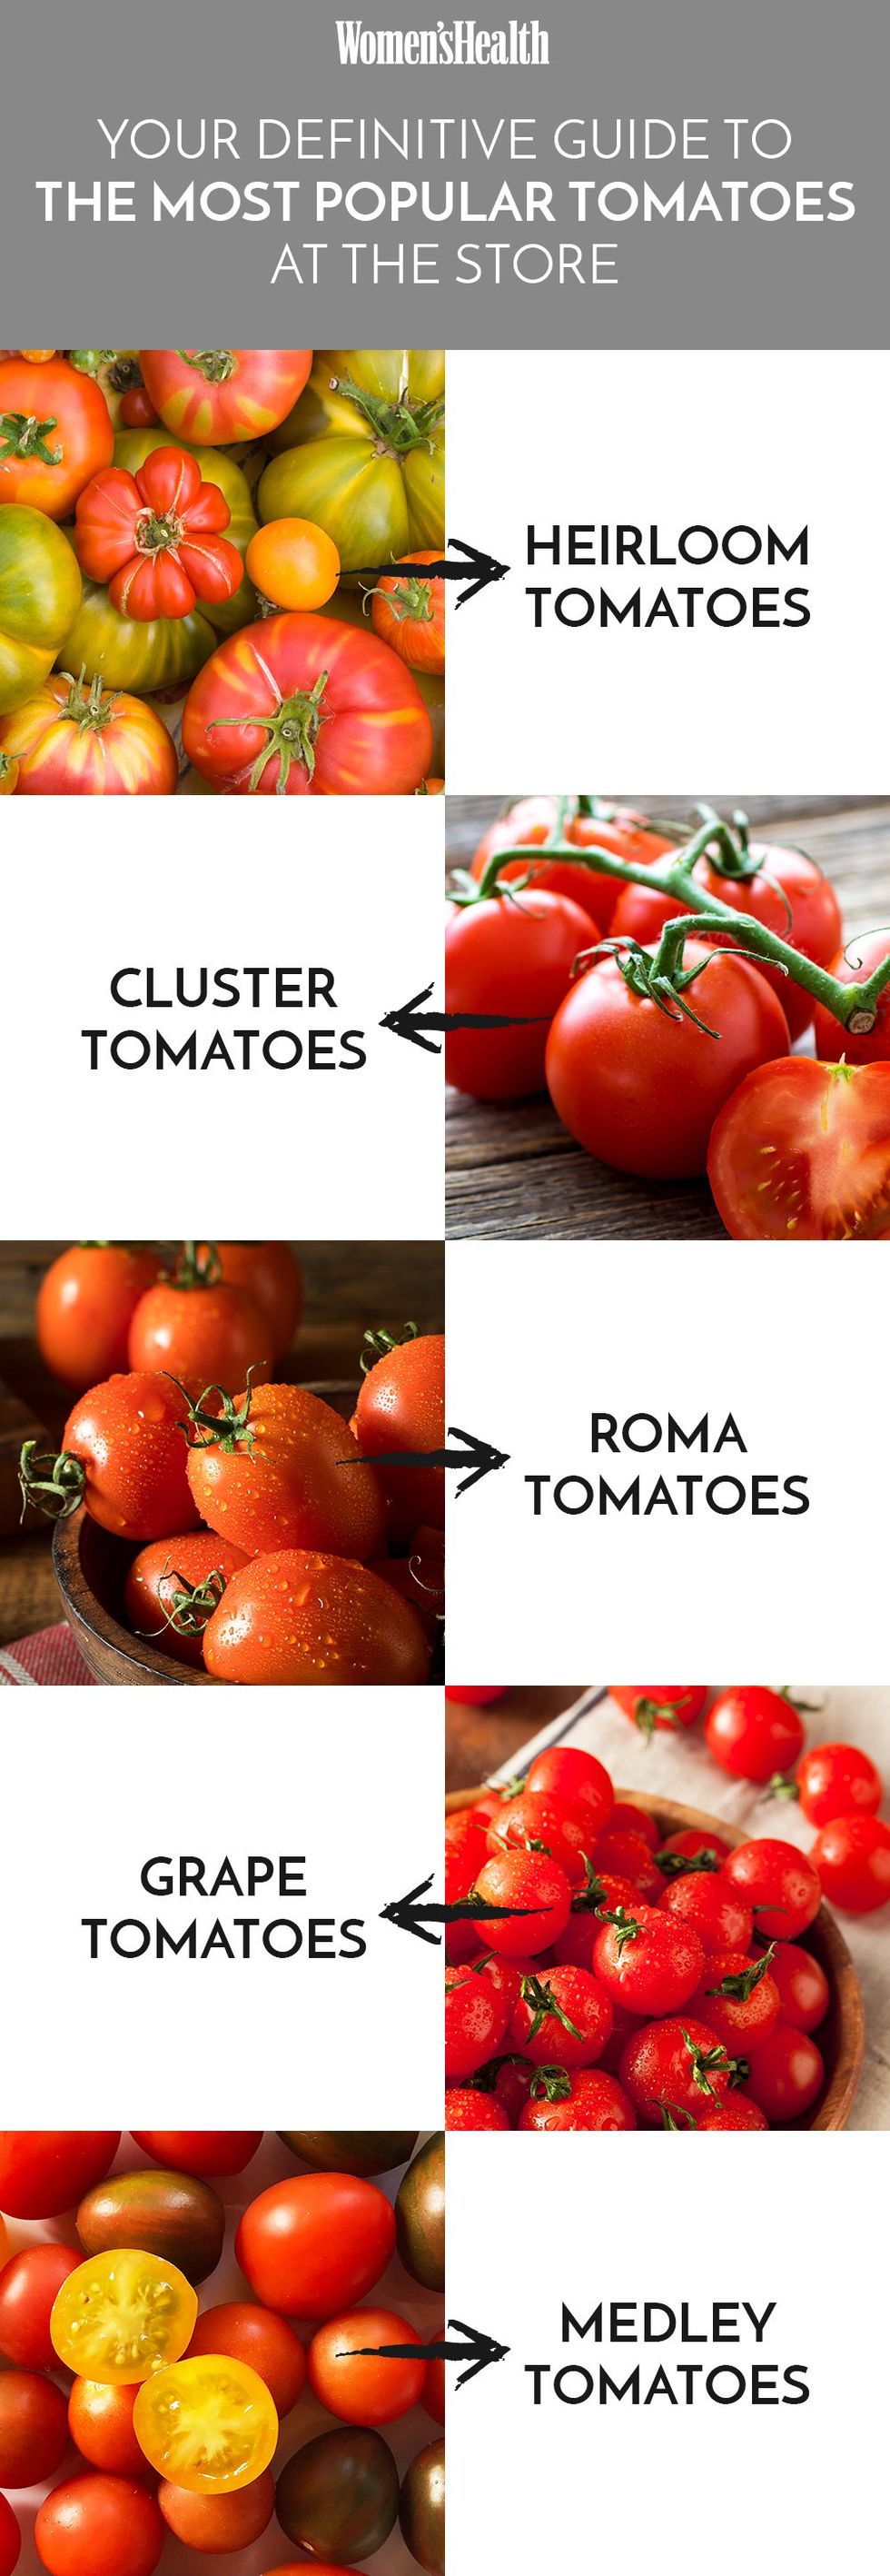 Guide to tomatoes 